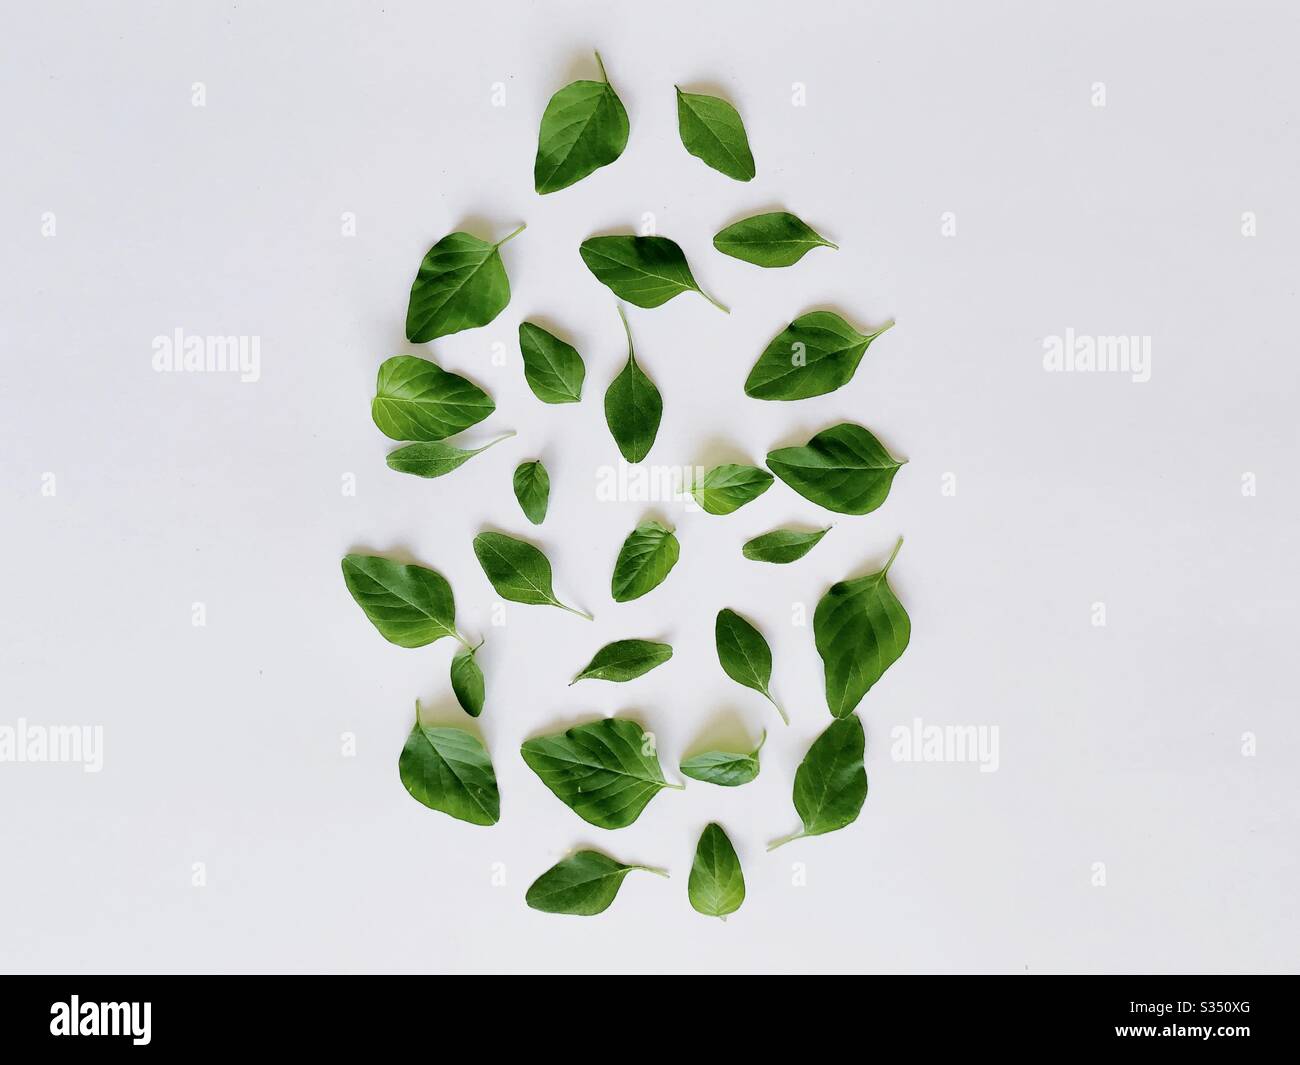 Easter egg : easter concept with green Leaves and branches Stock Photo